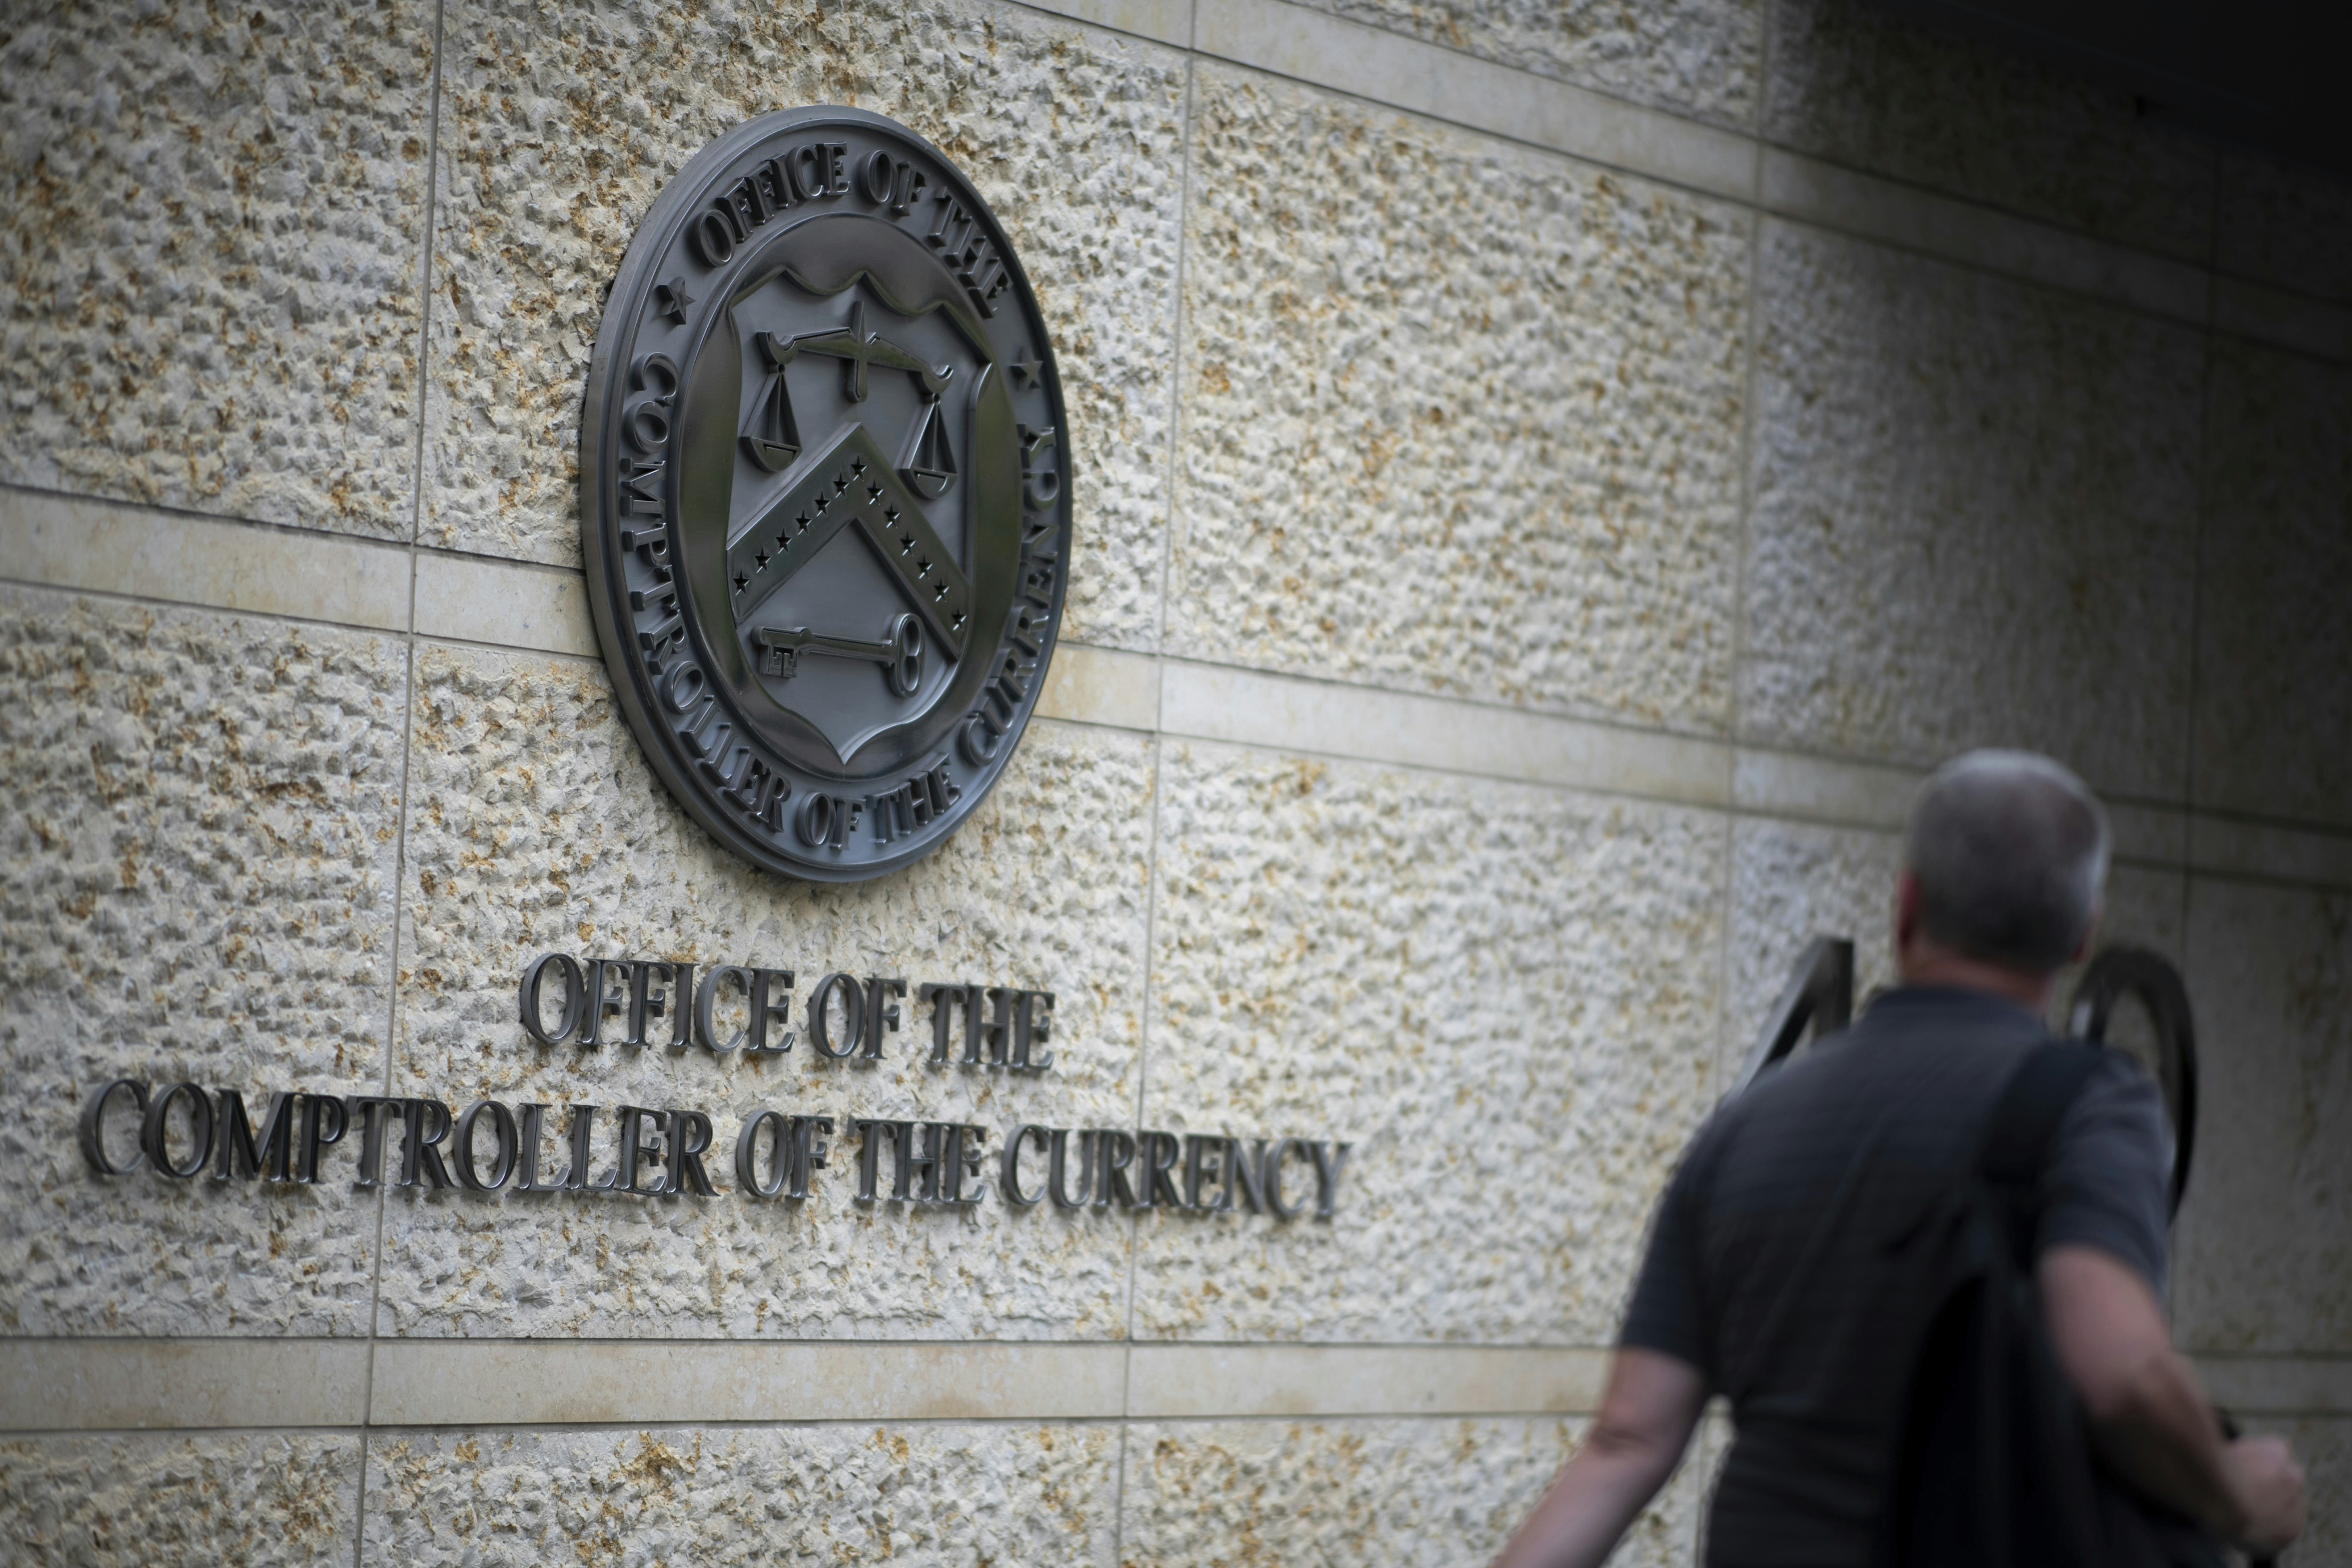 A man walks by the Office of the Comptroller of the Currency logo as it appears on OCC headquarters in Washington, D.C., as seen on September 9, 2019.